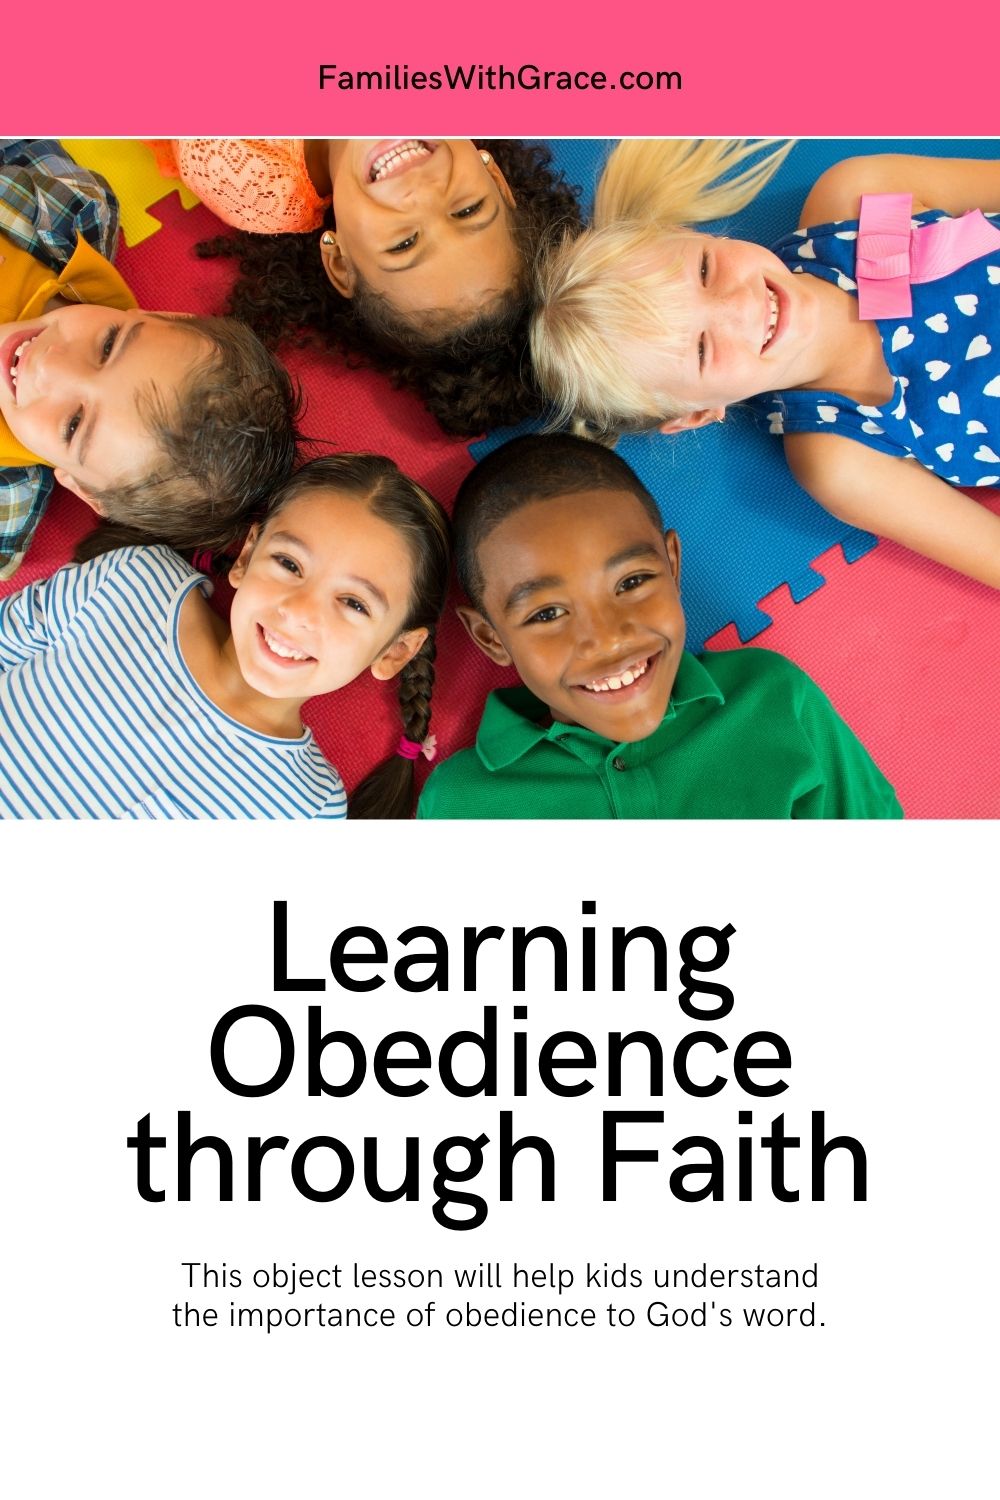 A Christian object lesson about obedience for kids